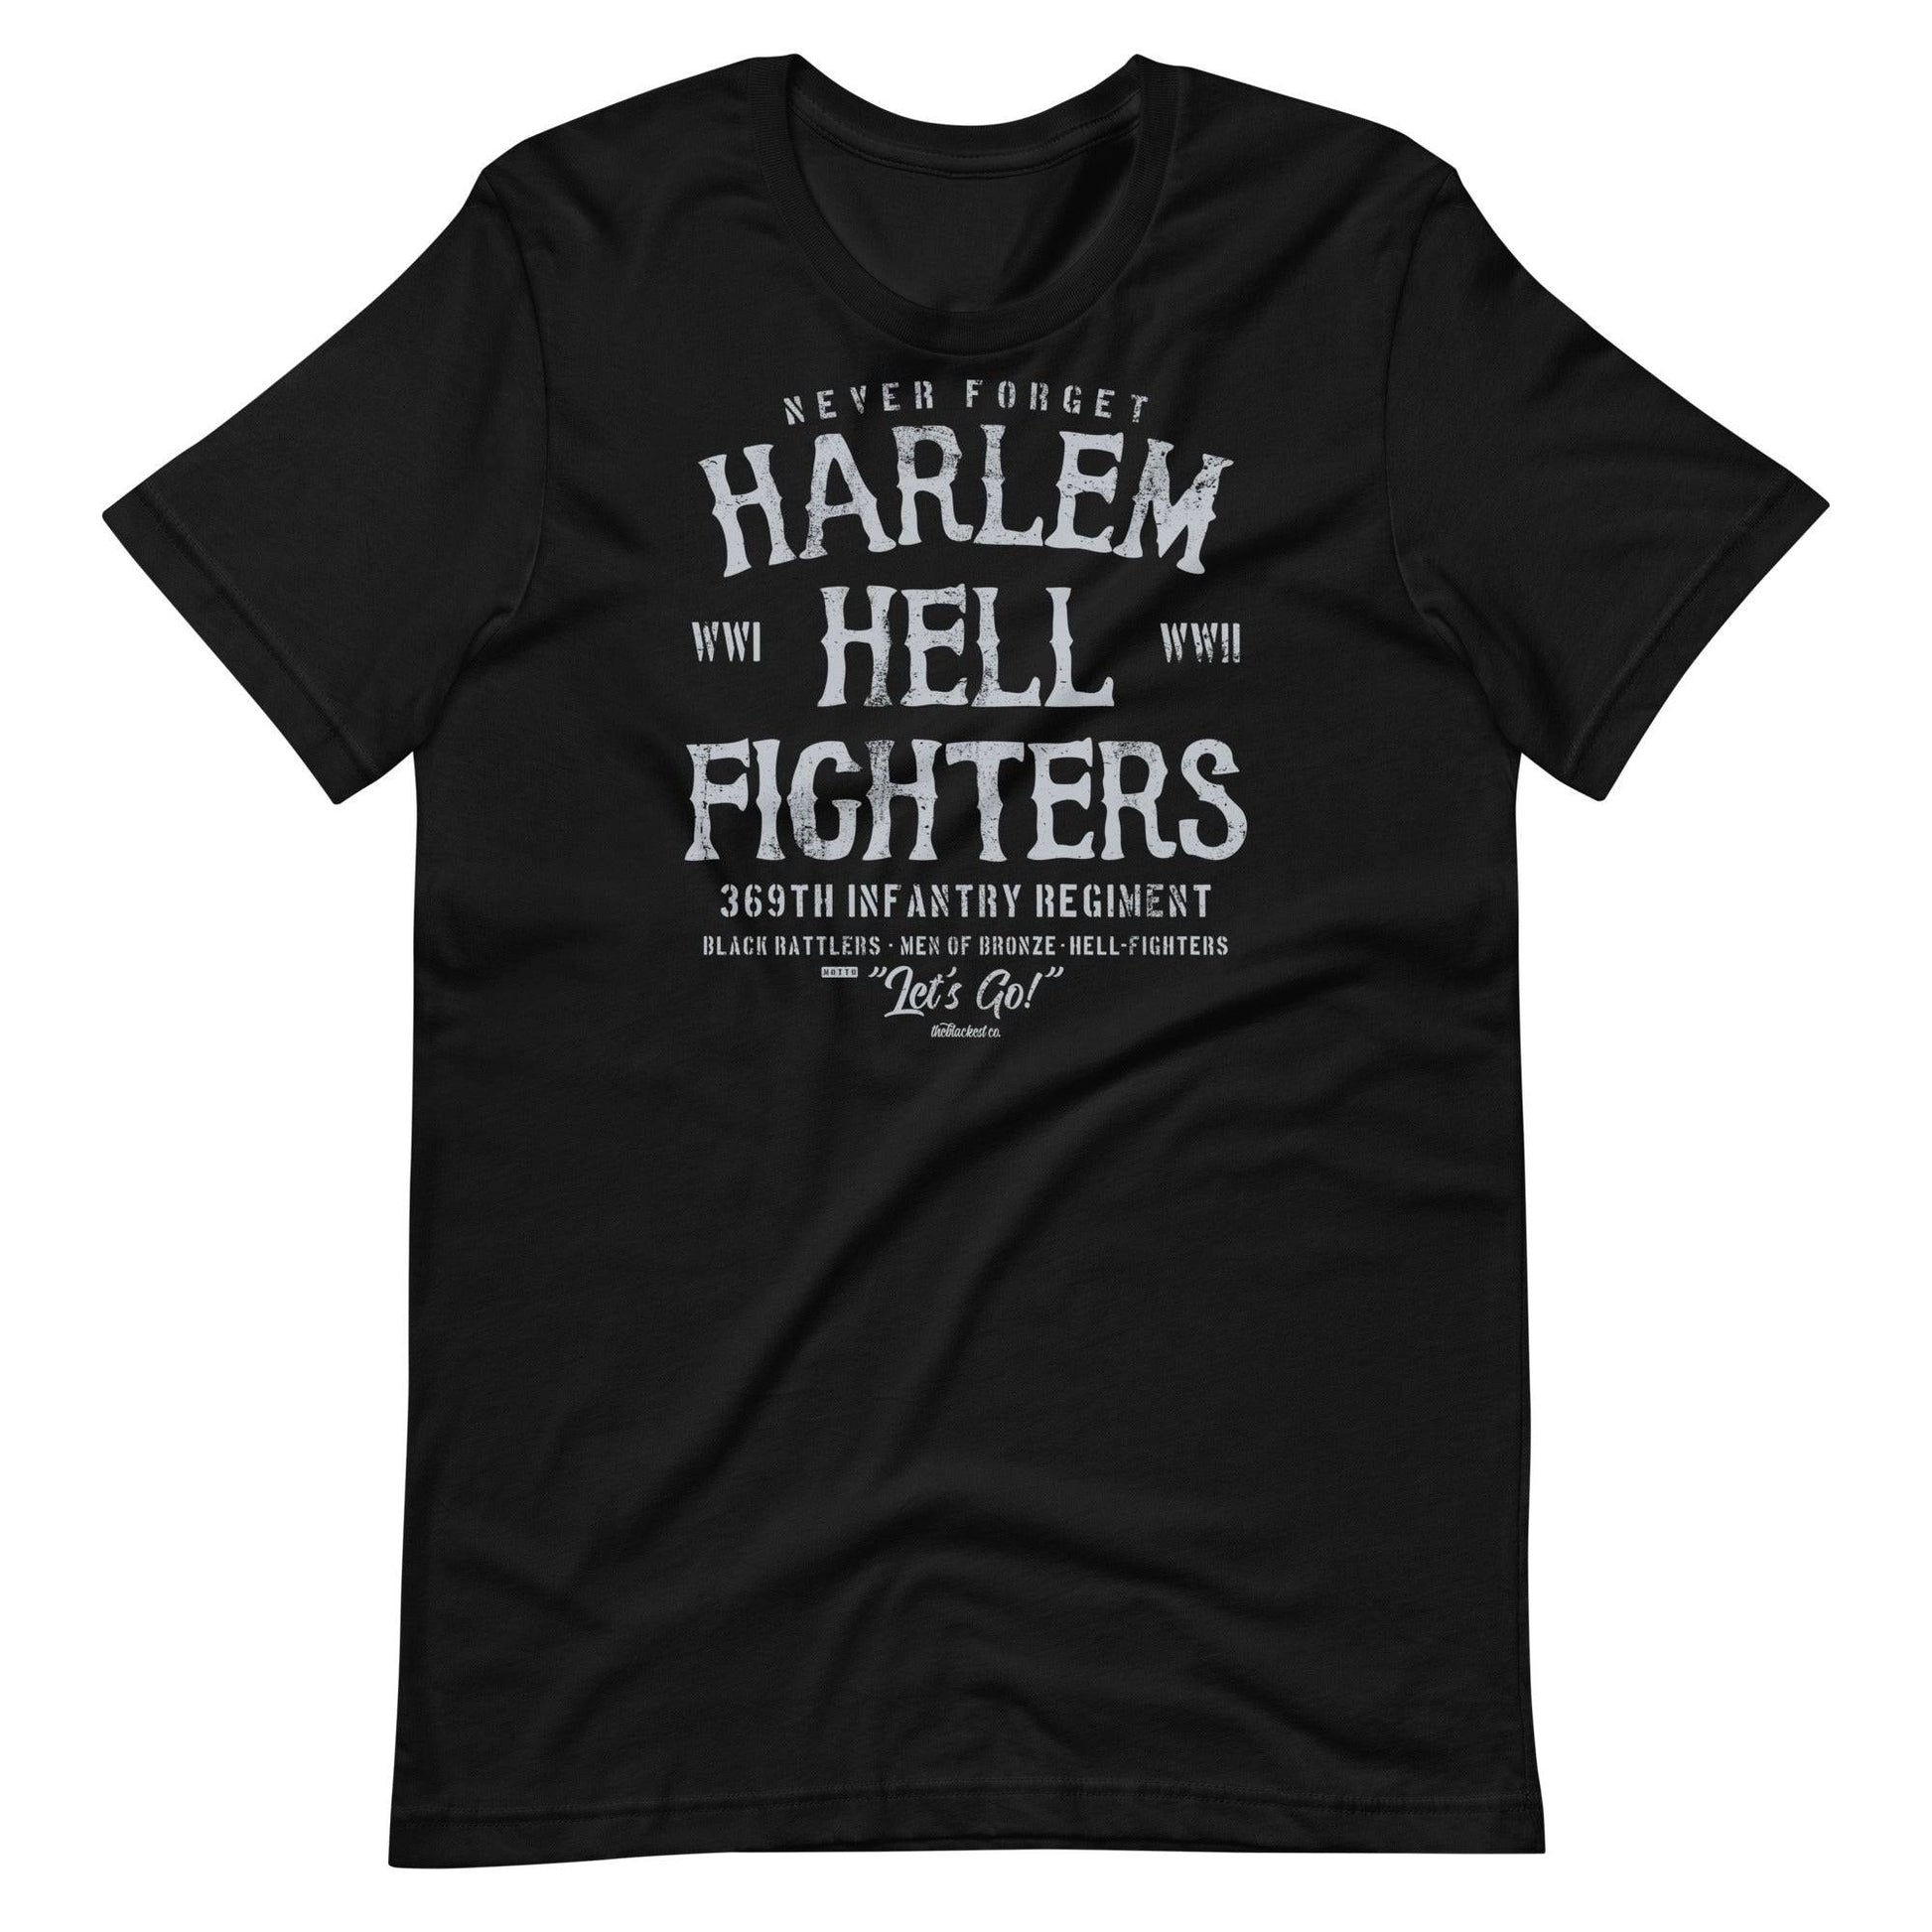 heather black t shirt with white text that reads harlem hellfighters wwi and wwii